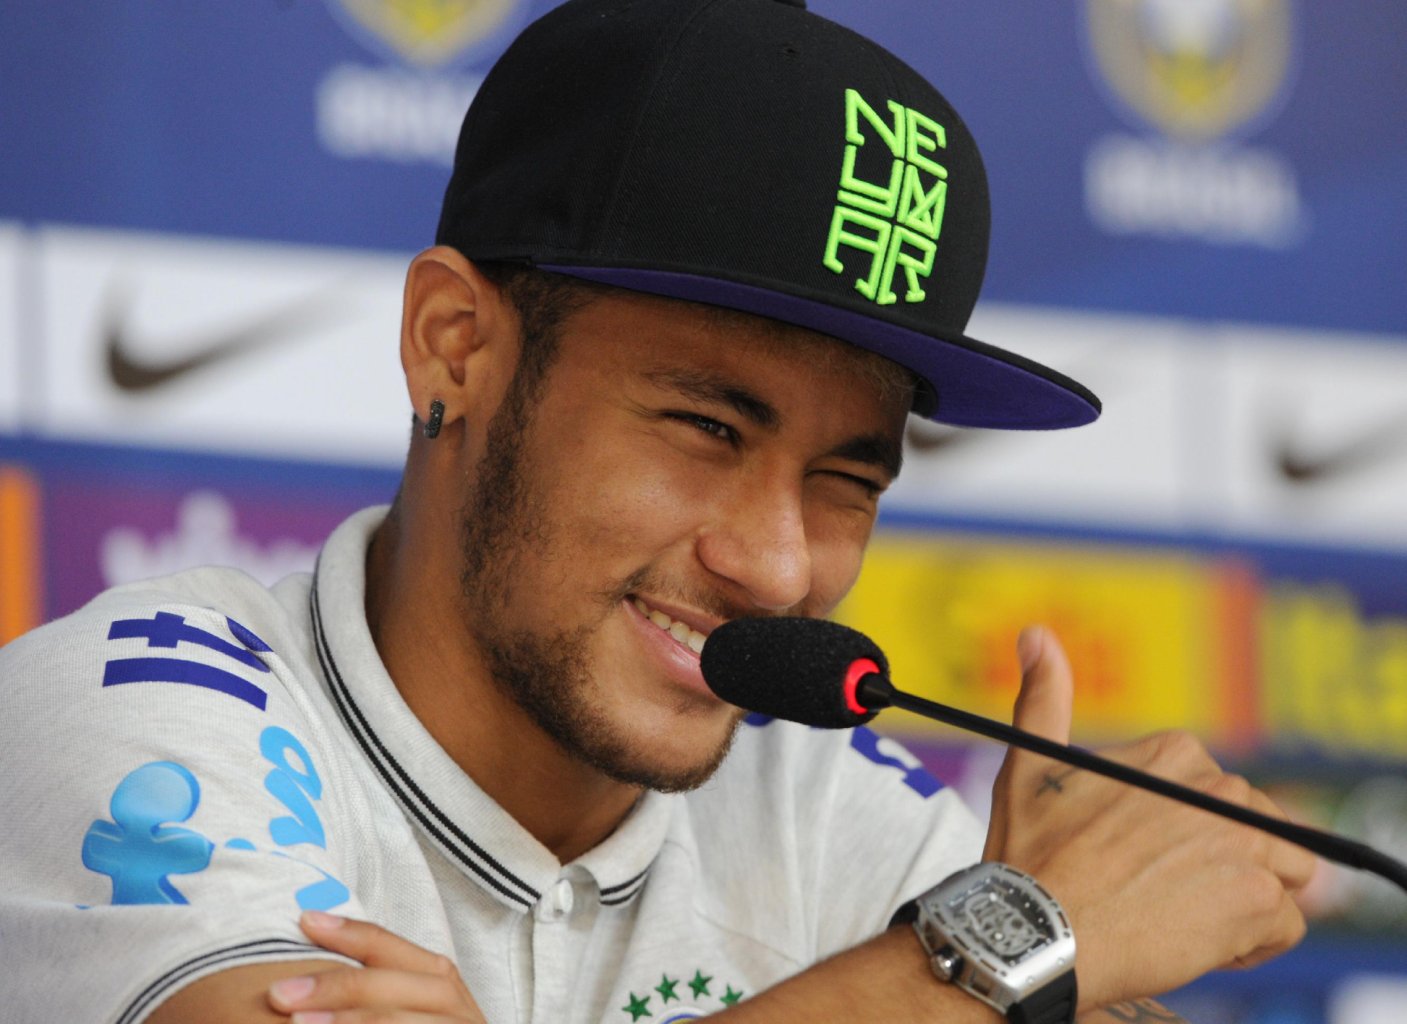 Neymar wearing a hat or cap of his own brand